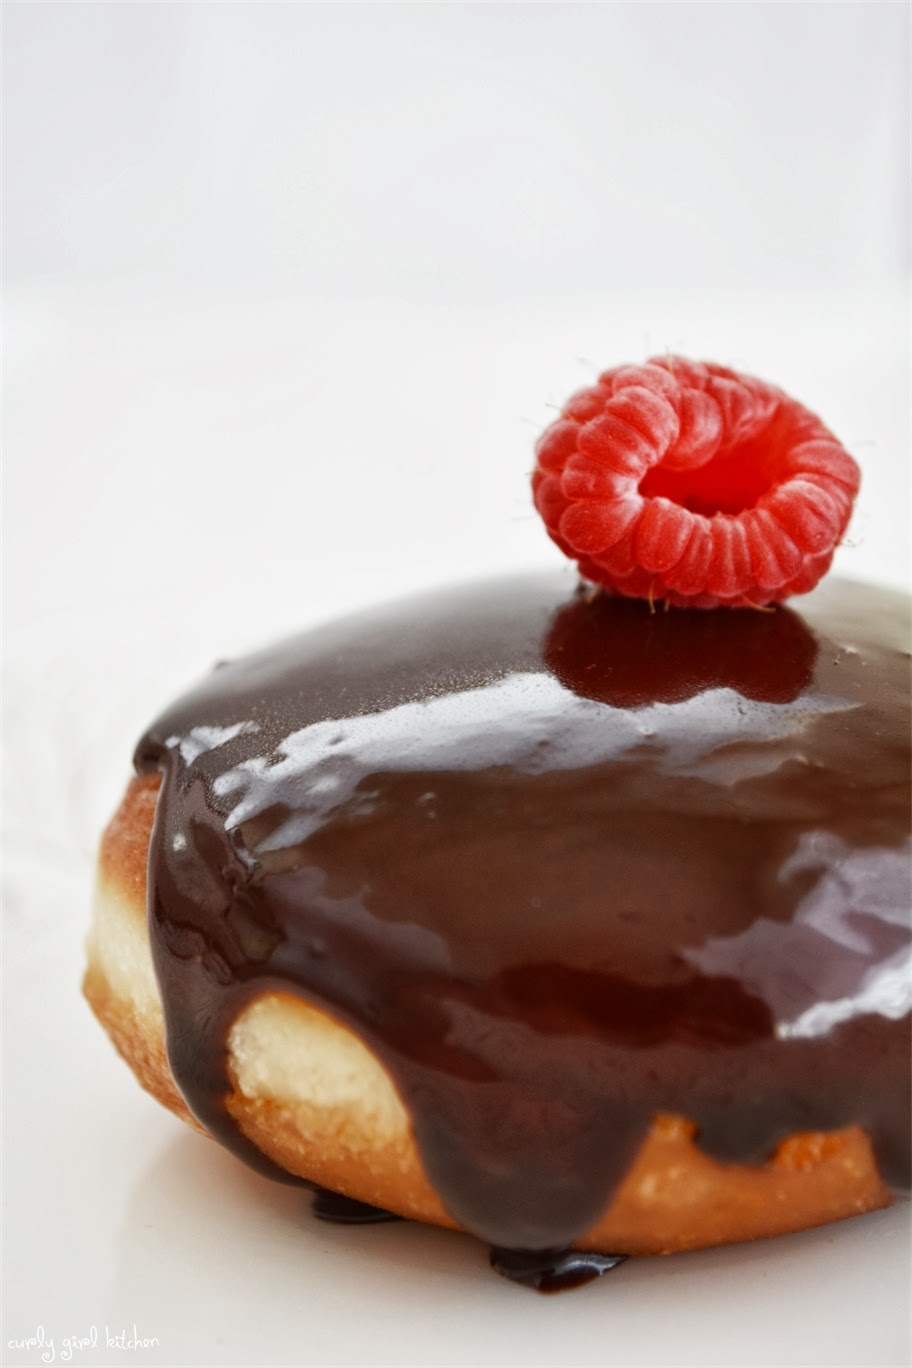 Curly Girl Kitchen: Raspberry and Cream Filled Chocolate Glazed Doughnuts